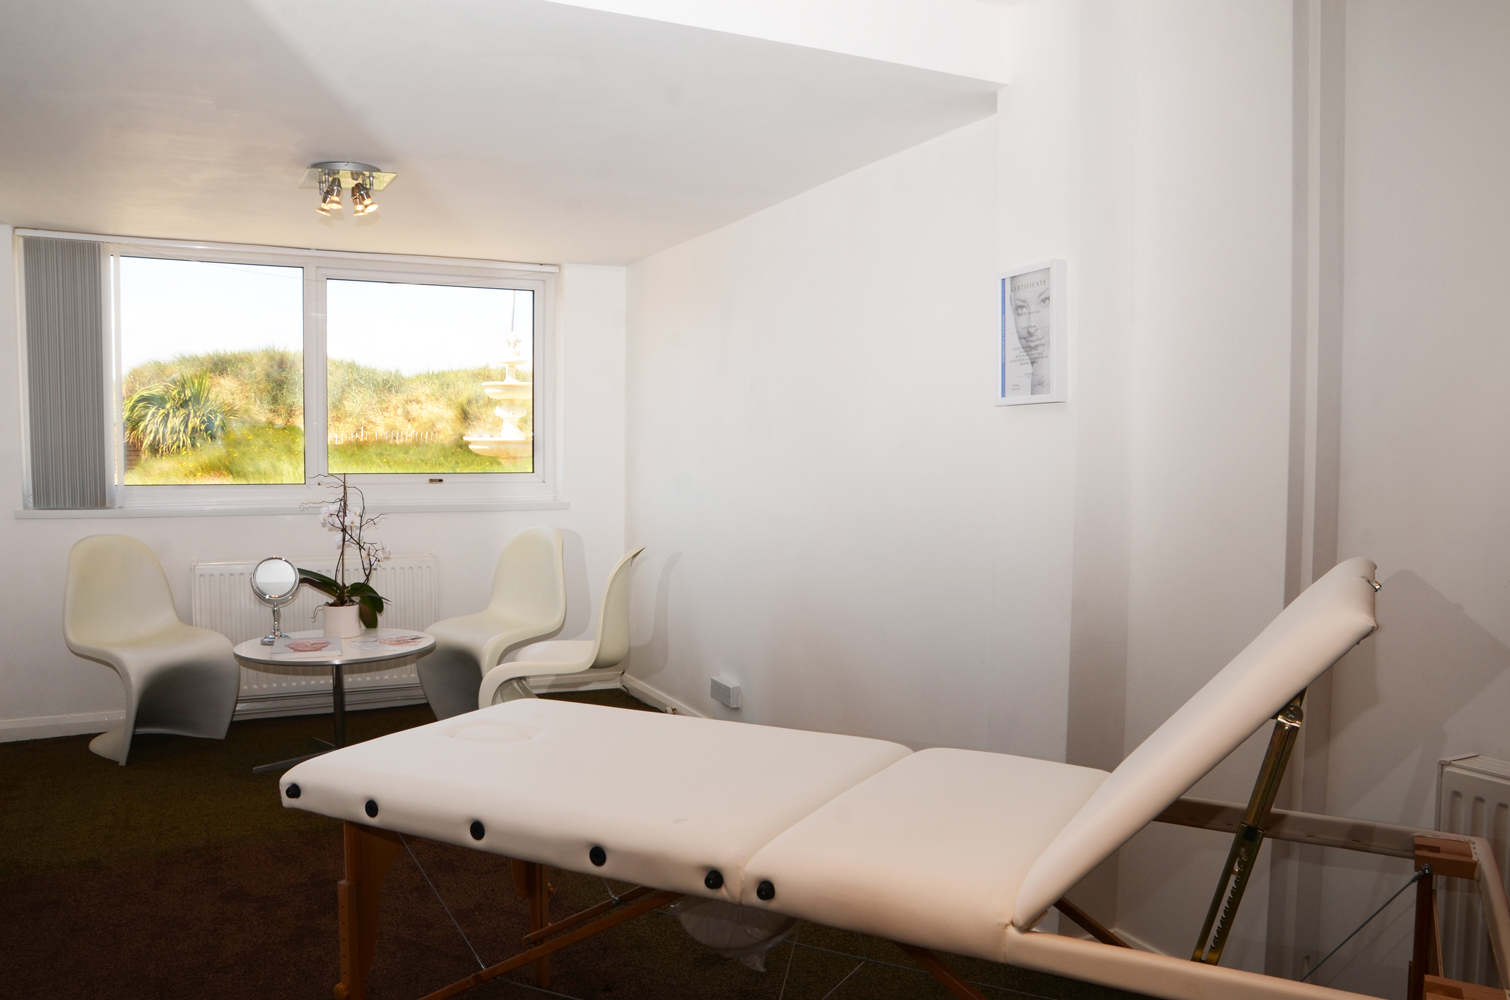 The treatment room at The Fountain Clinic, Lytham St. Annes